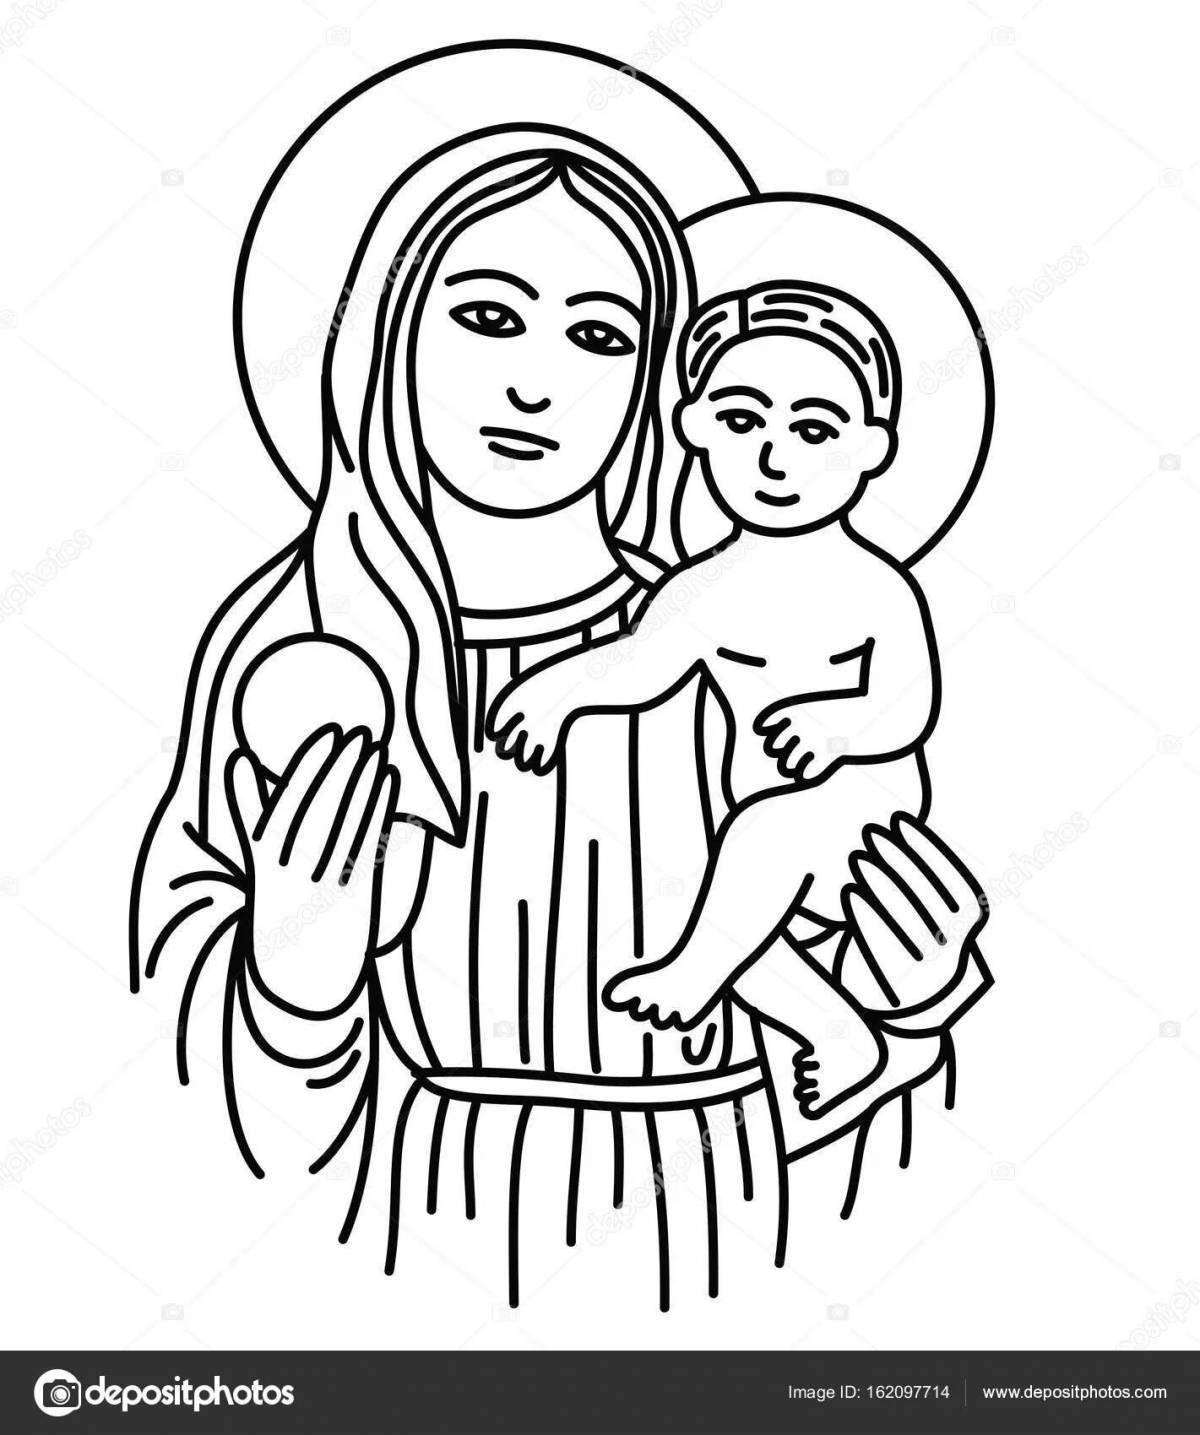 Virgin Mary and Child #9